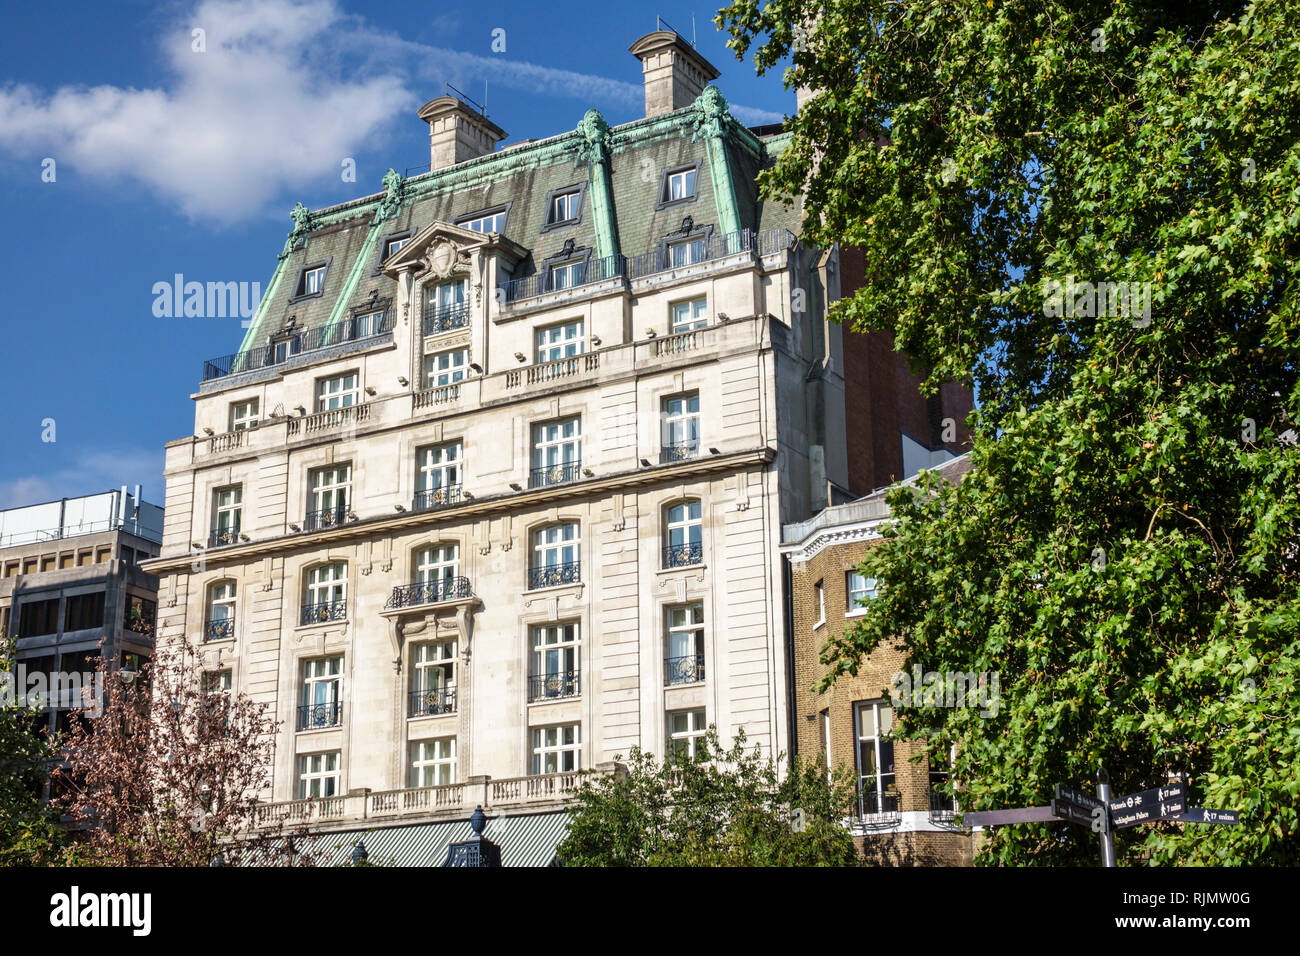 London England United Kingdom Great Britain West End Piccadilly Green Park Ritz Carlton Hotel historic Grade II listed building 5-star luxury Stock Photo